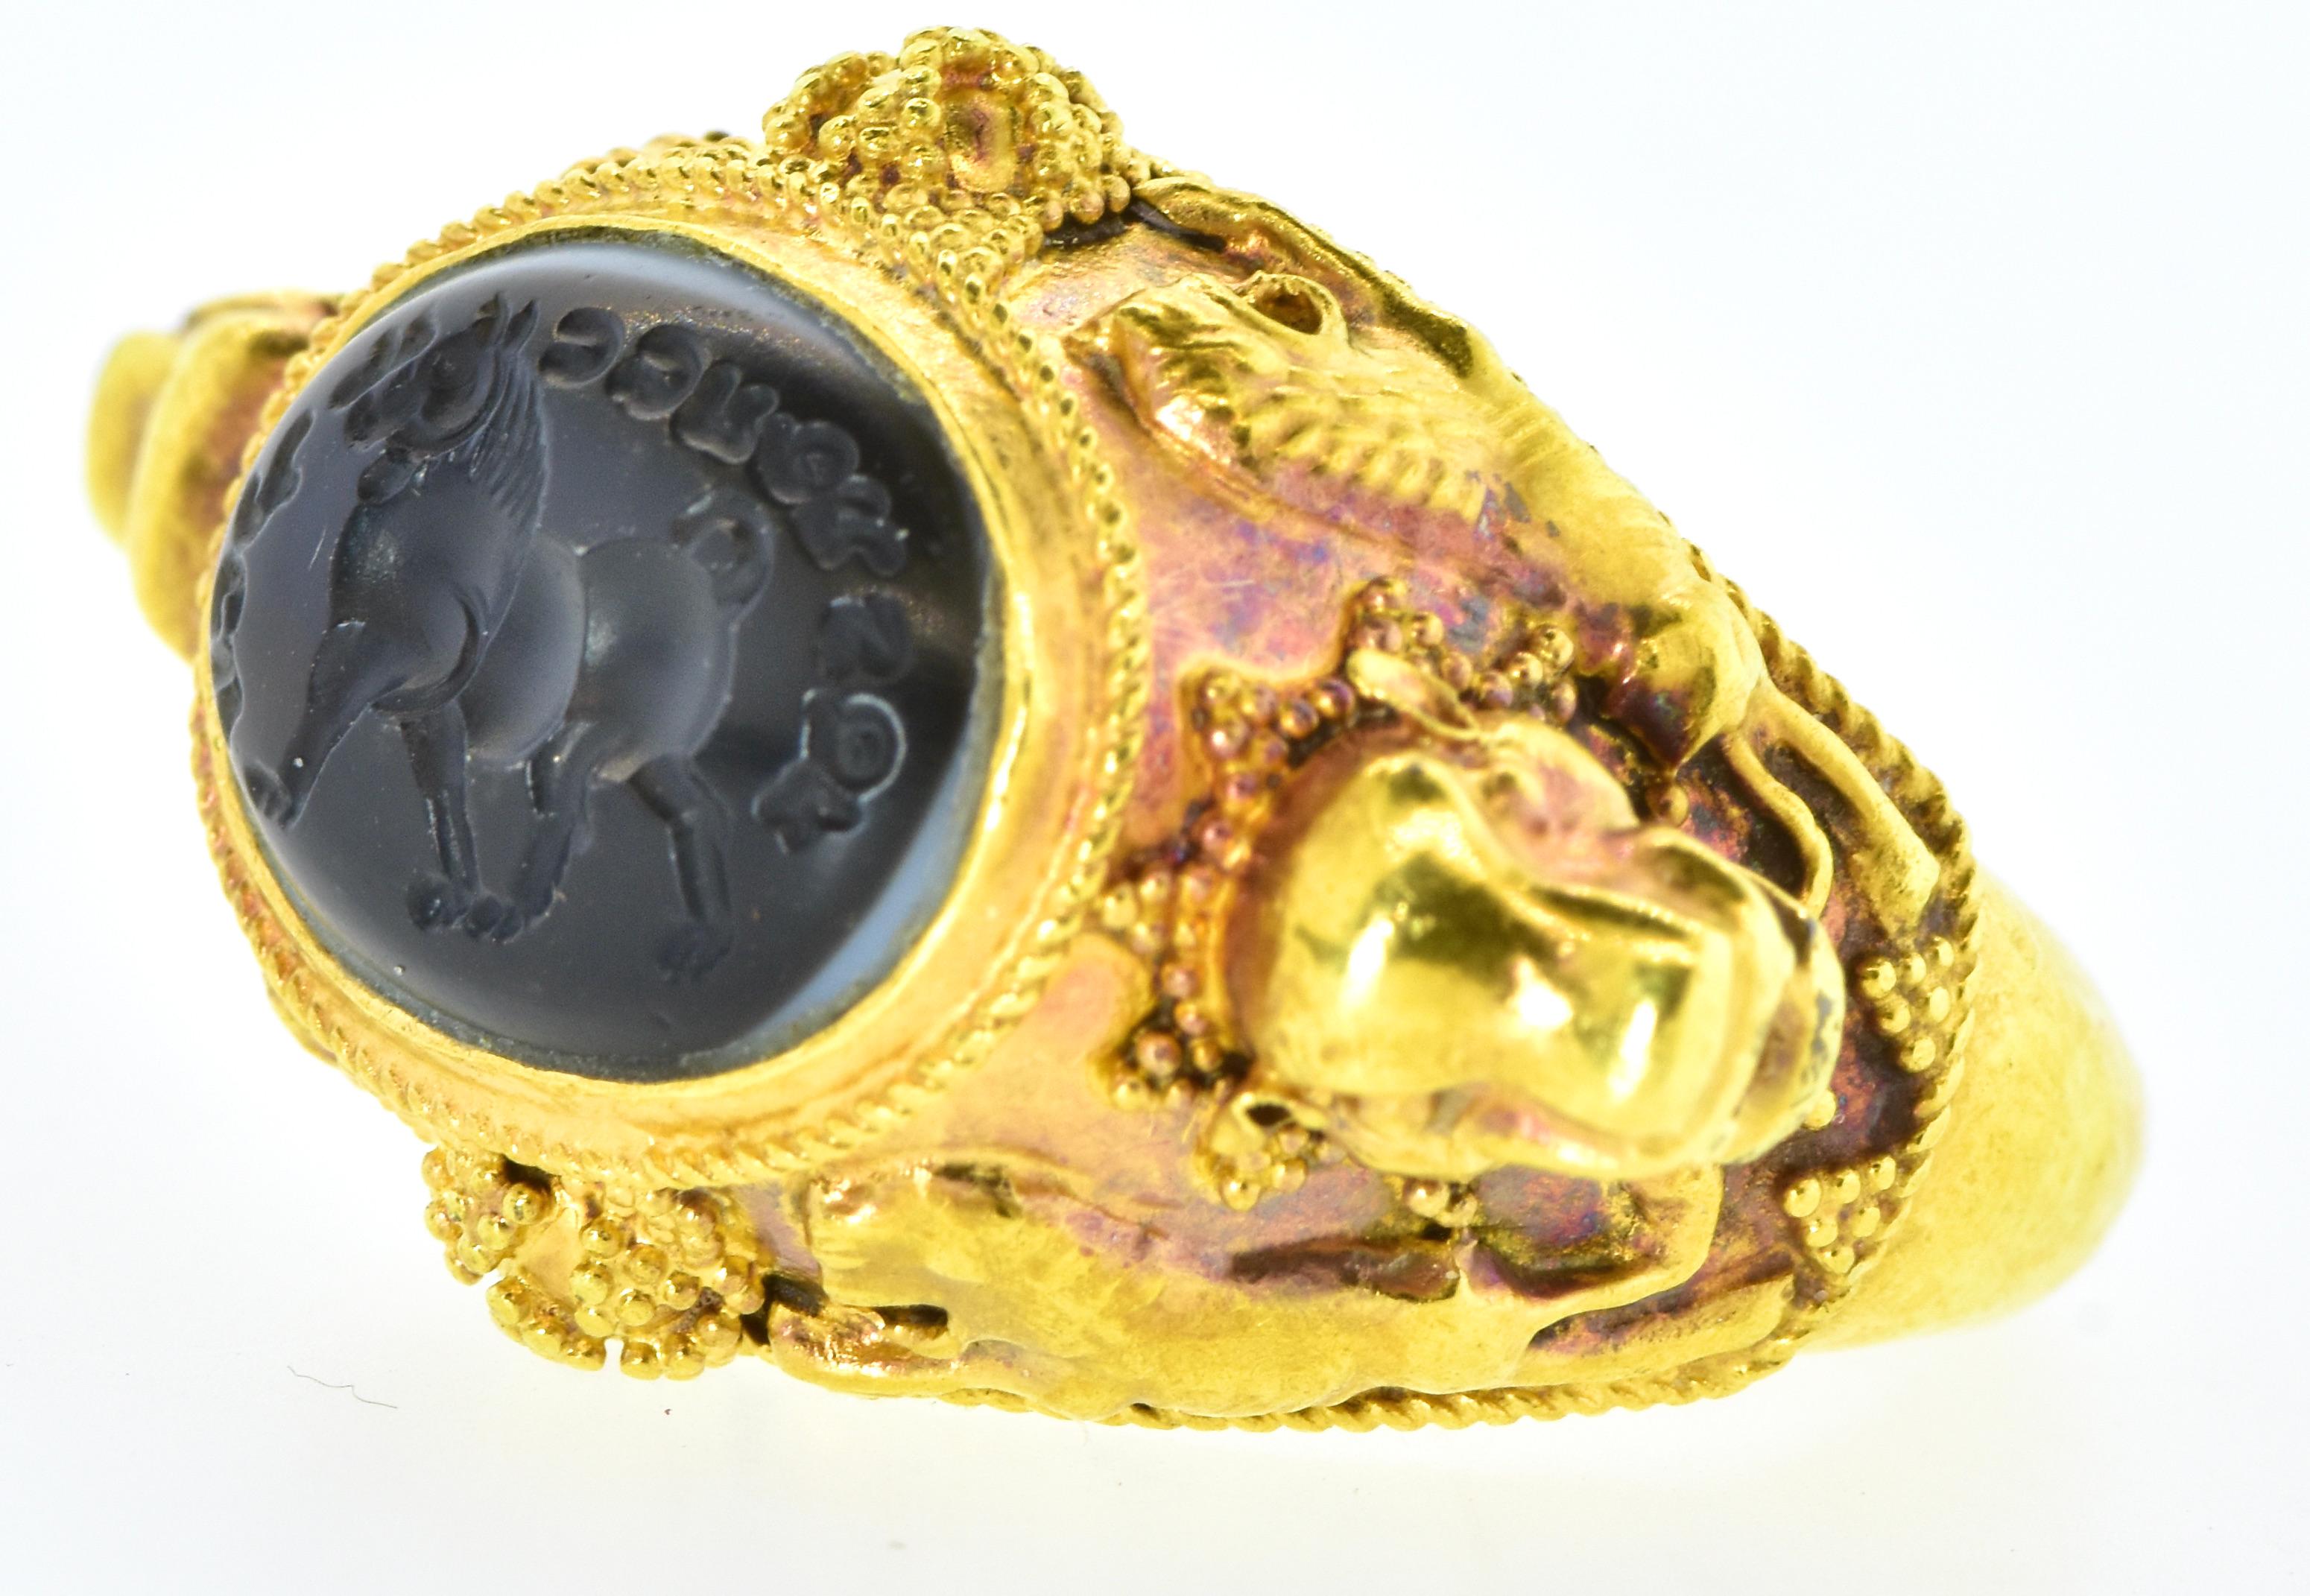 Antique Banded Agate Intaglio Within a Rare 22k Ring, C. 1800 3